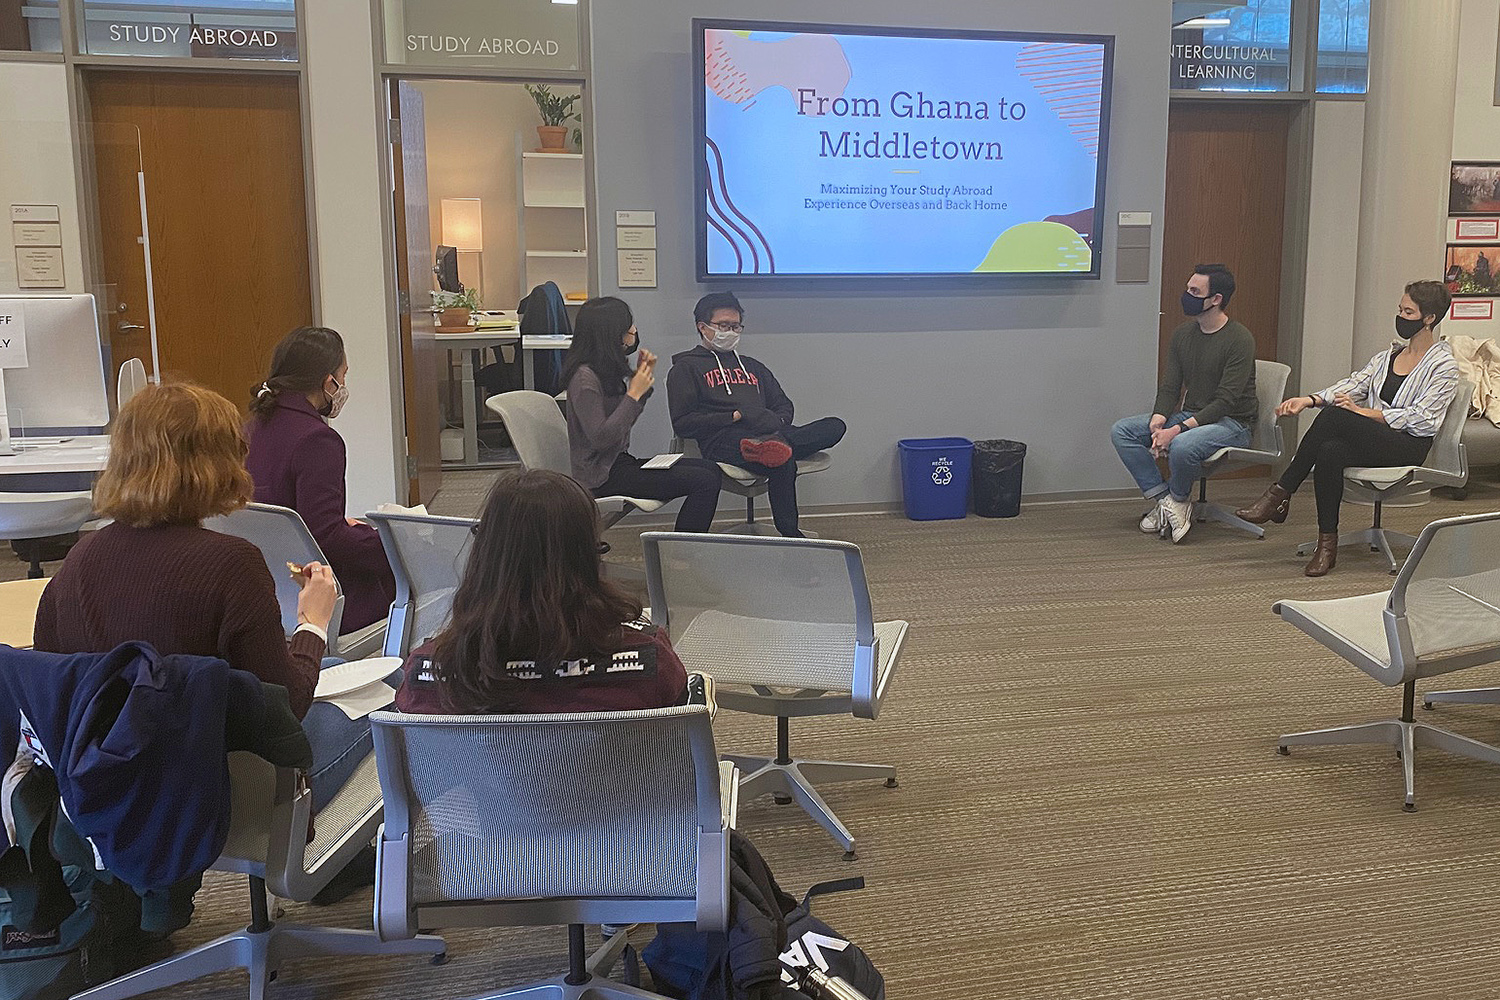 Several study abroad graduates led a discussion entitled "From Ghana to Middletown: Maximizing your study abroad experience abroad and back home." 